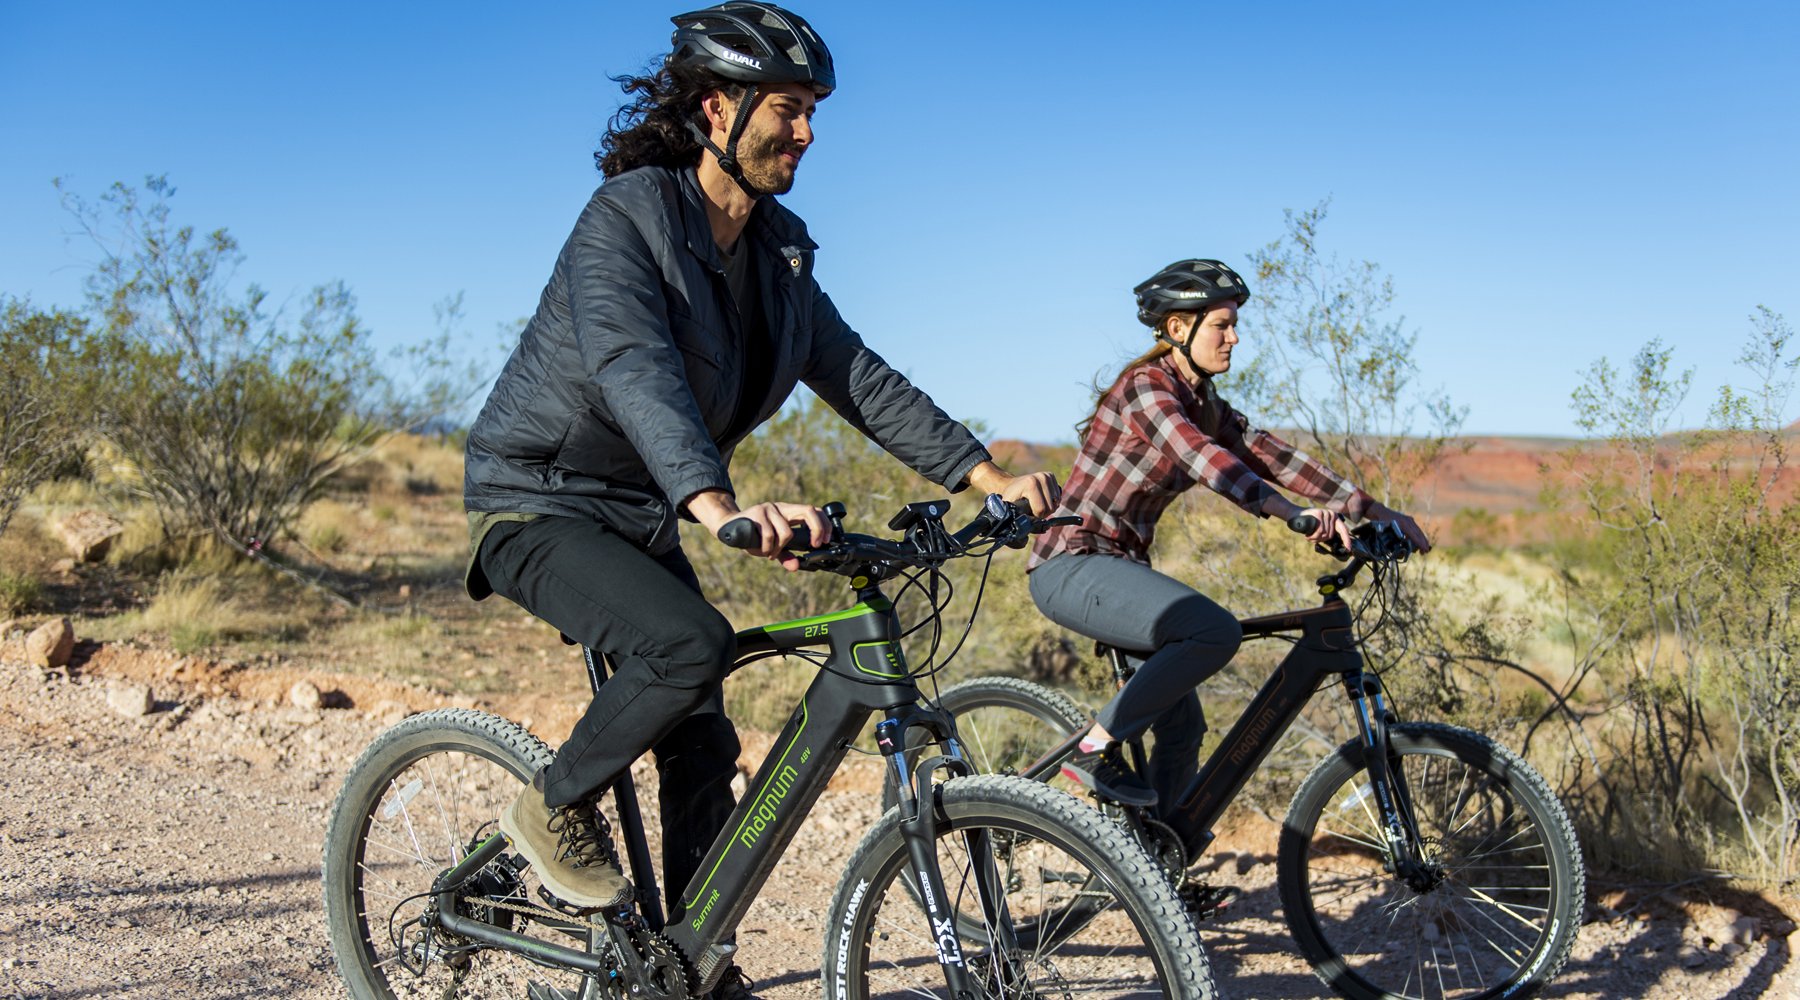 Two riders on Magnum Summit e-bikes on dirt gravel trail with sparse foliage and blue sky